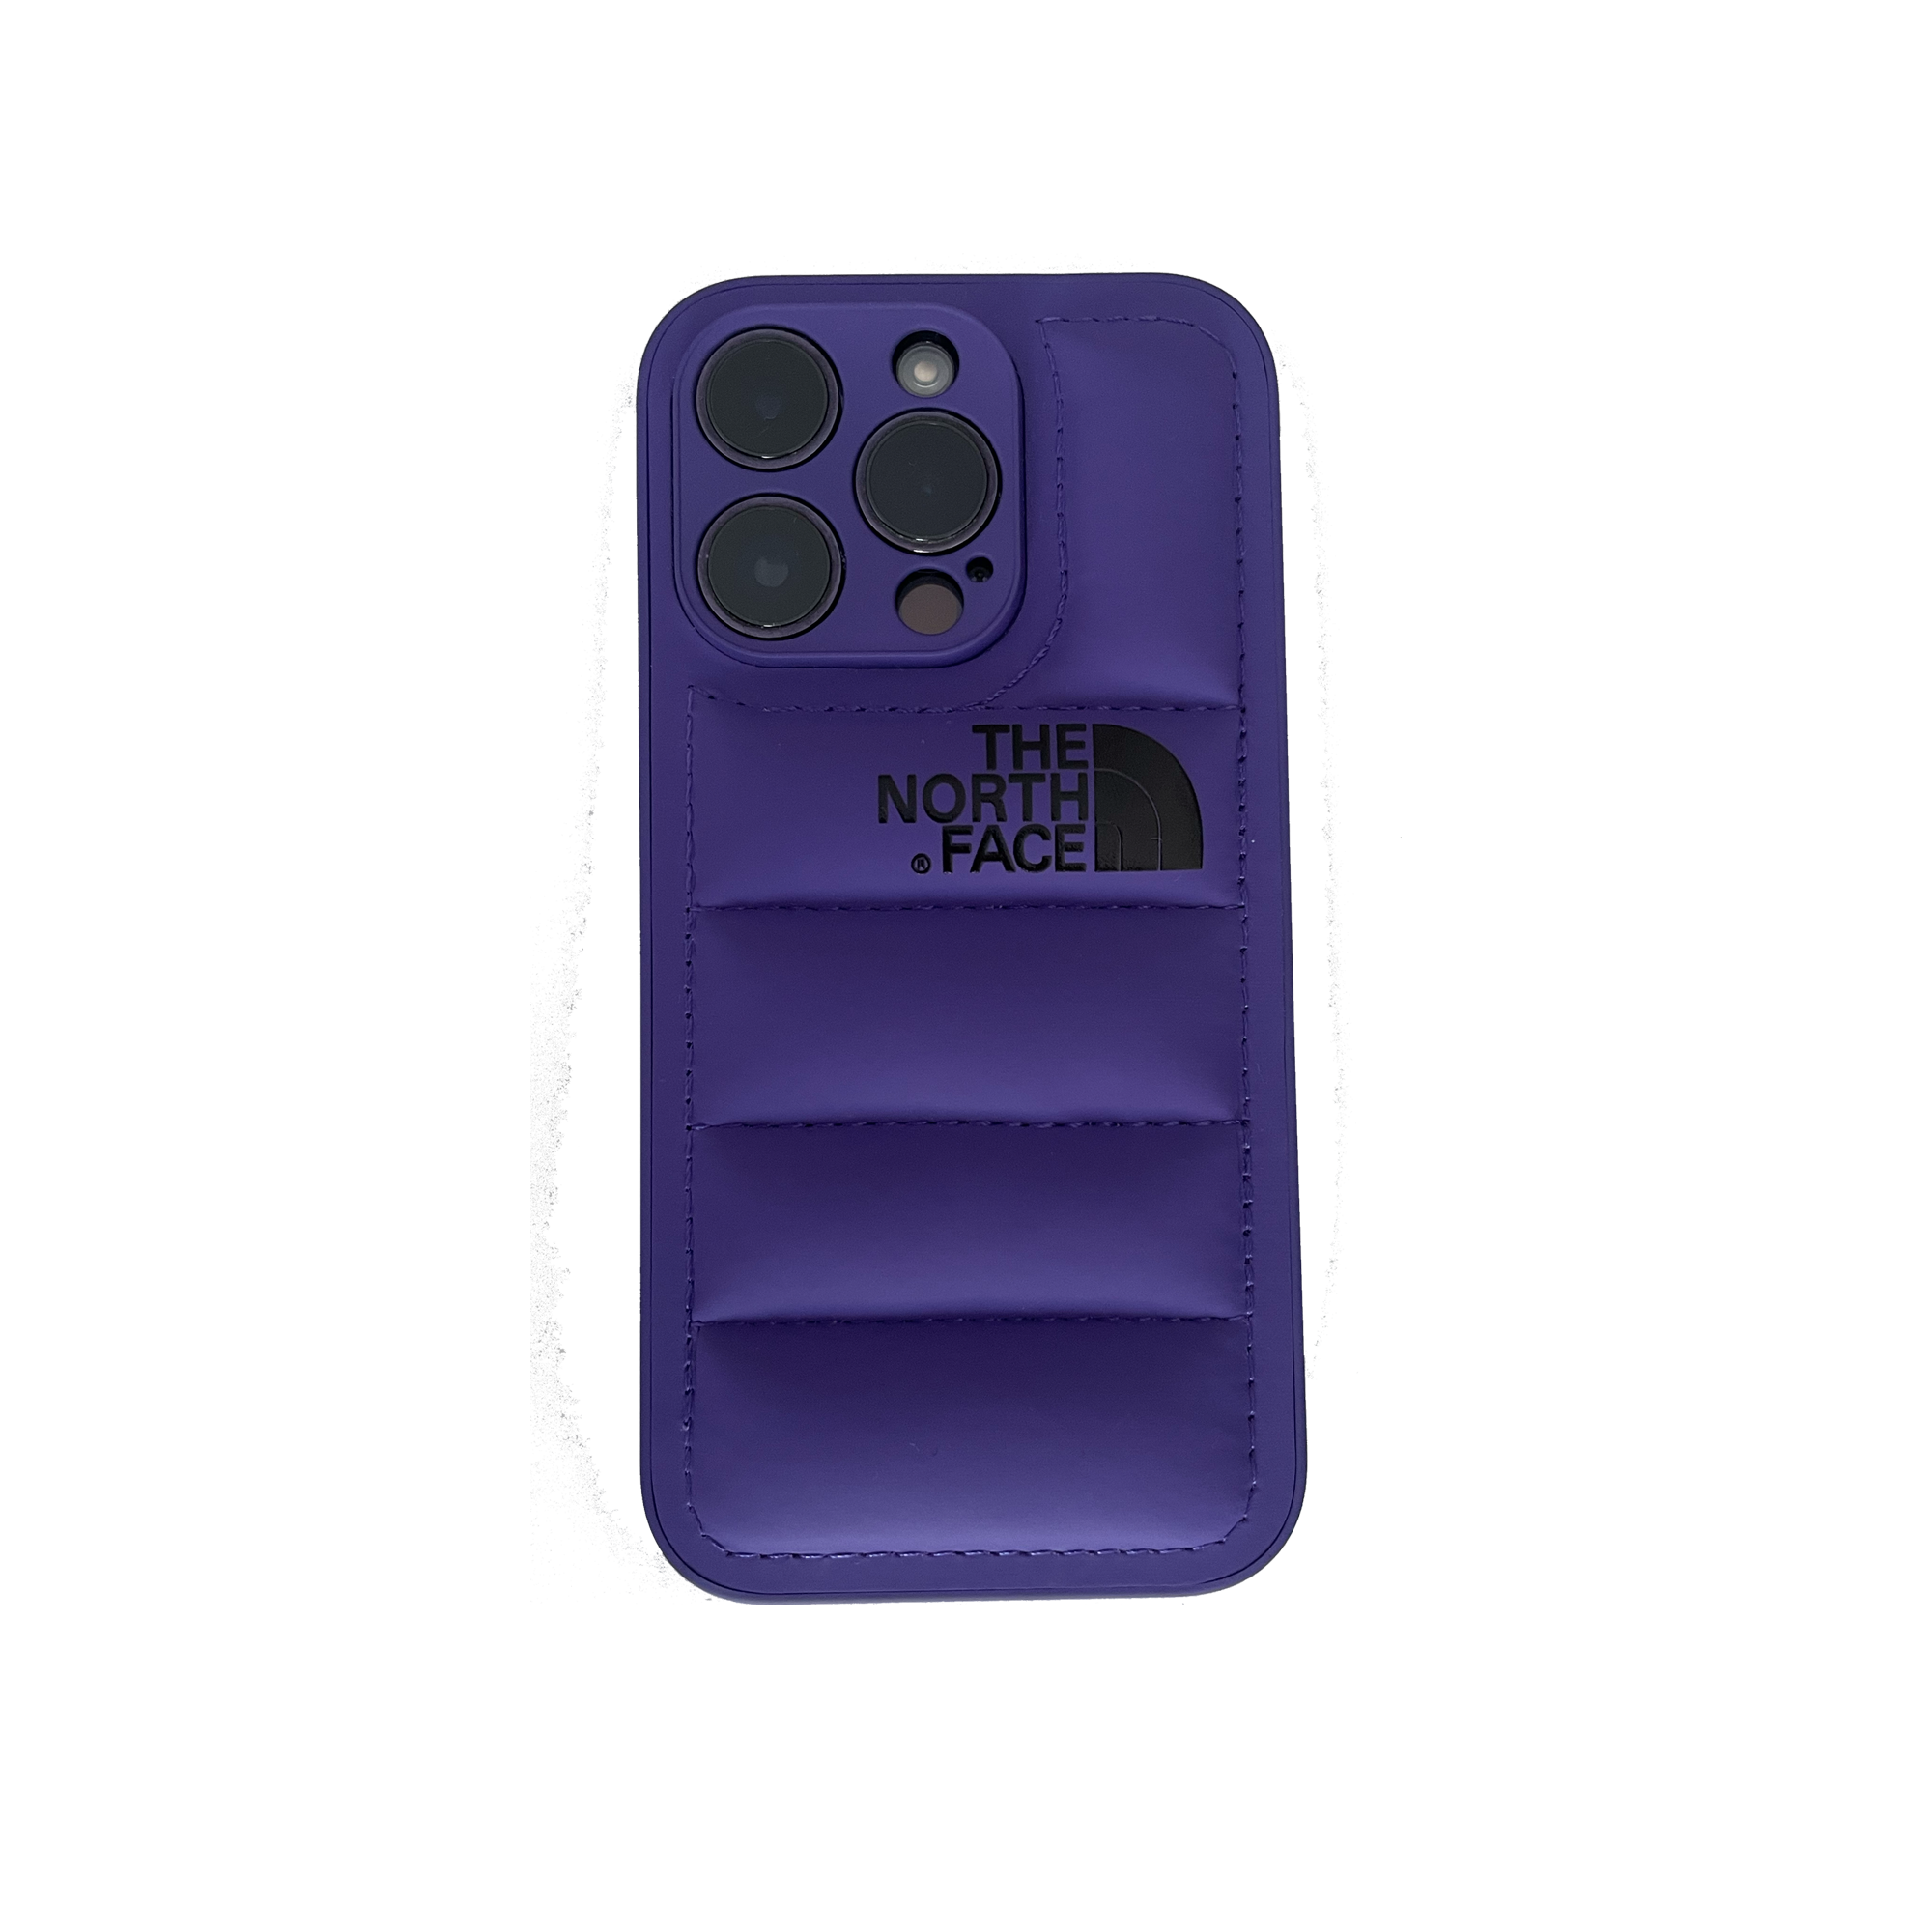 Chic purple The North Face phone case, merging modern design with robust security.